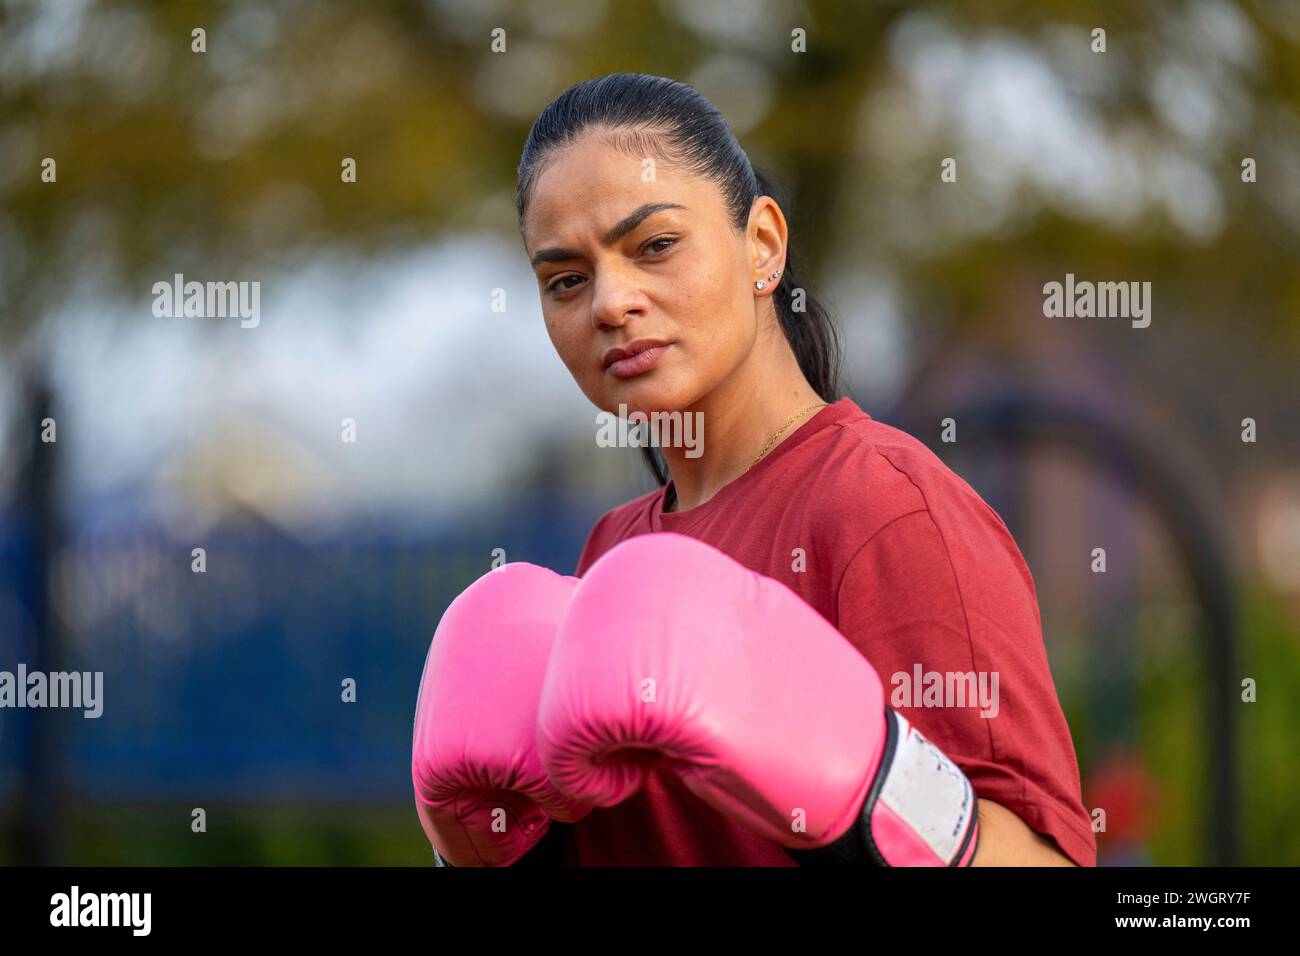 Healthy woman boxing training in a public park Stock Photo